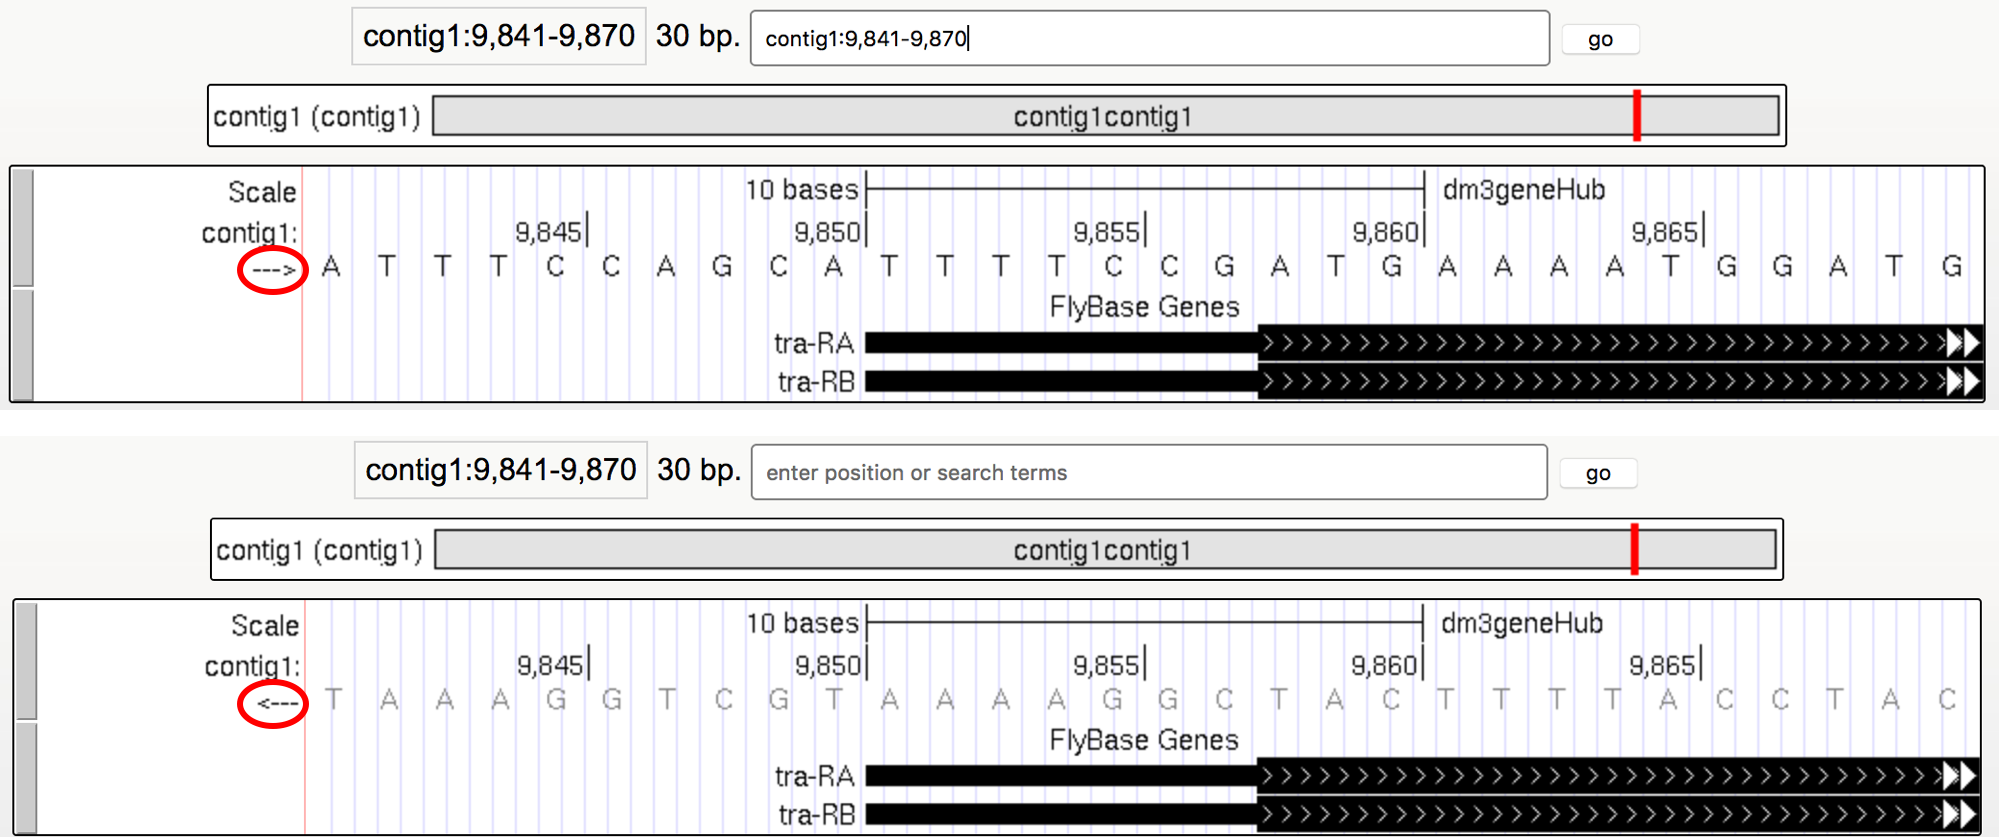 Nucleotide sequences on the base position track